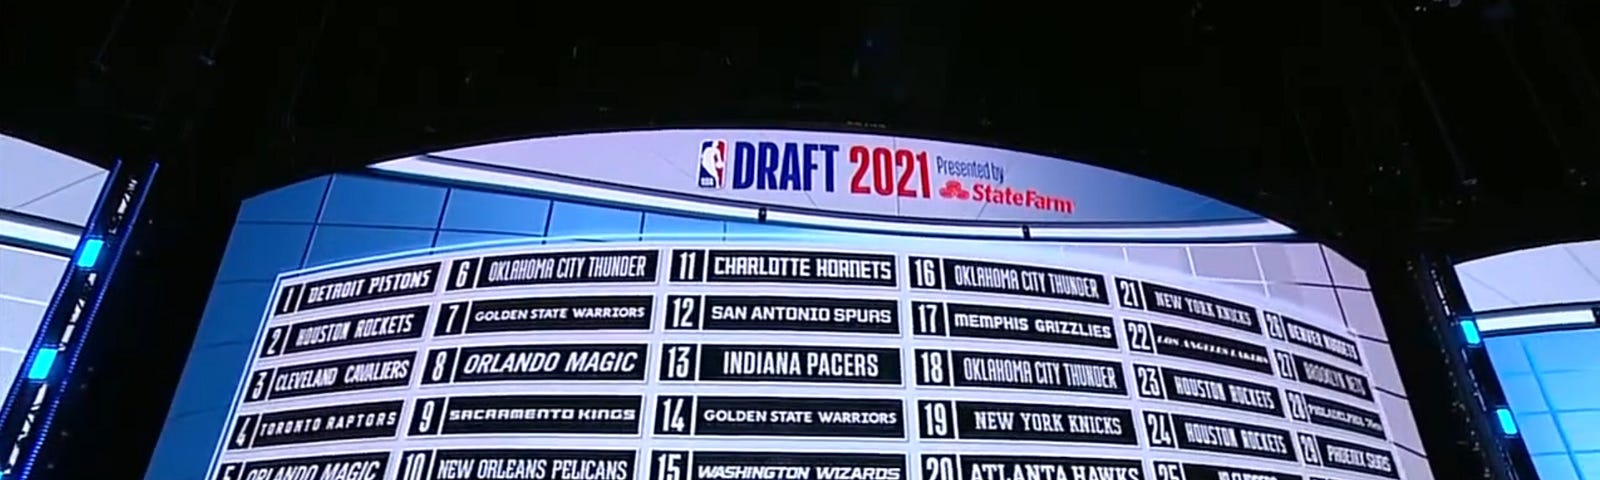 NBA Draft Day is here — merry Christmas! Here’s everything you need to know about the 2021 NBA Draft.